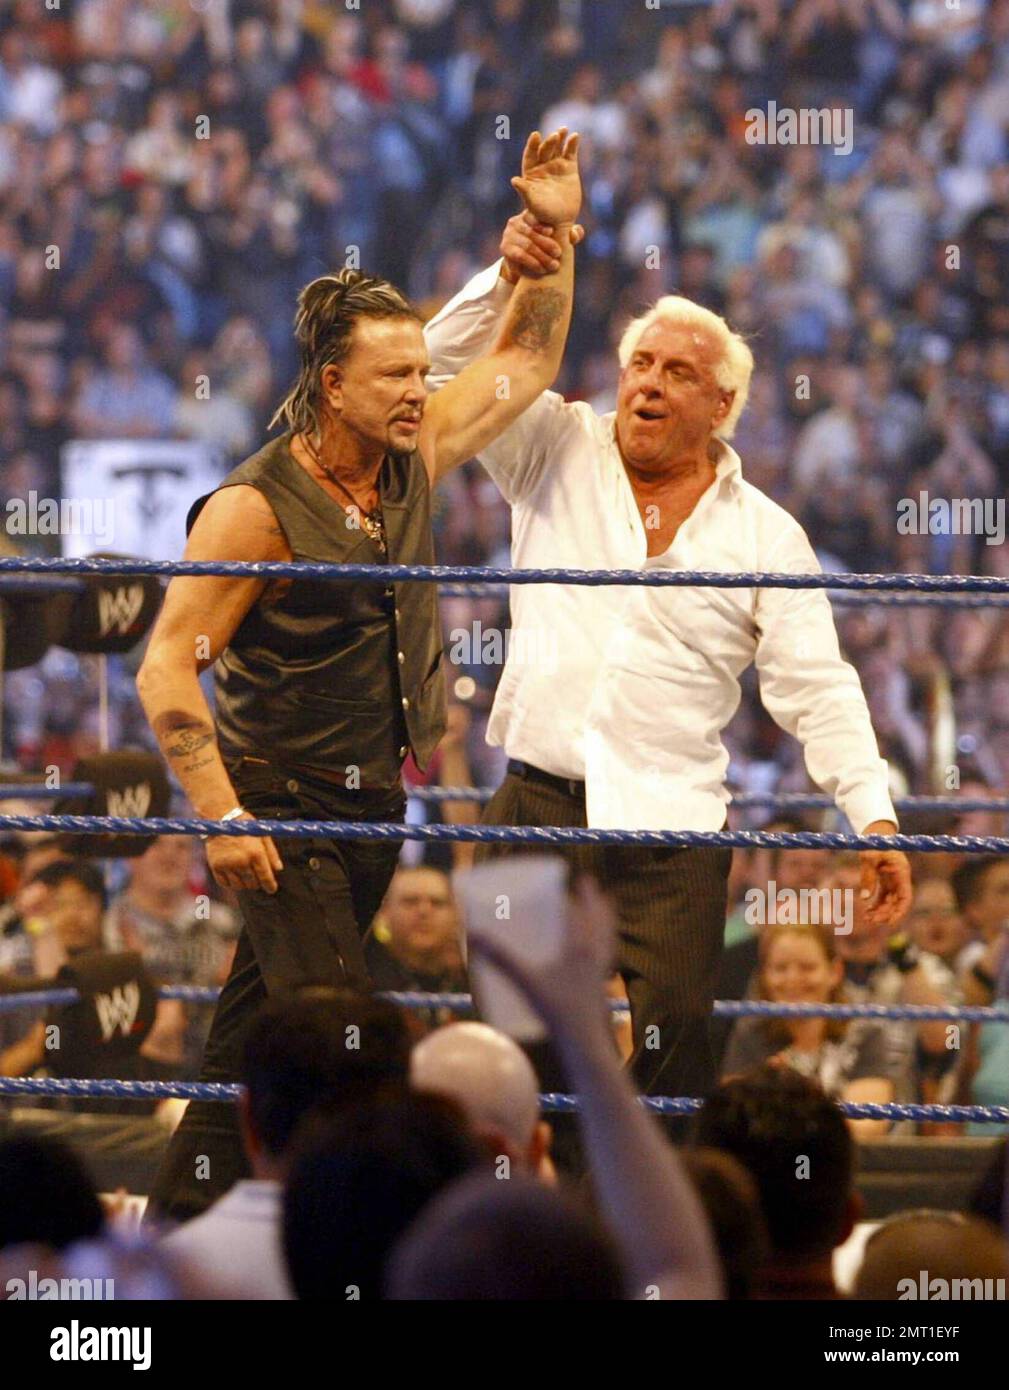 Academy Award nominee Mickey Rourke makes a special appearance in the ring with wrestler Ric Flair at Wrestlemania 25 at Reliant Stadium in Houston, TX. 4/5/09.   .  . Stock Photo